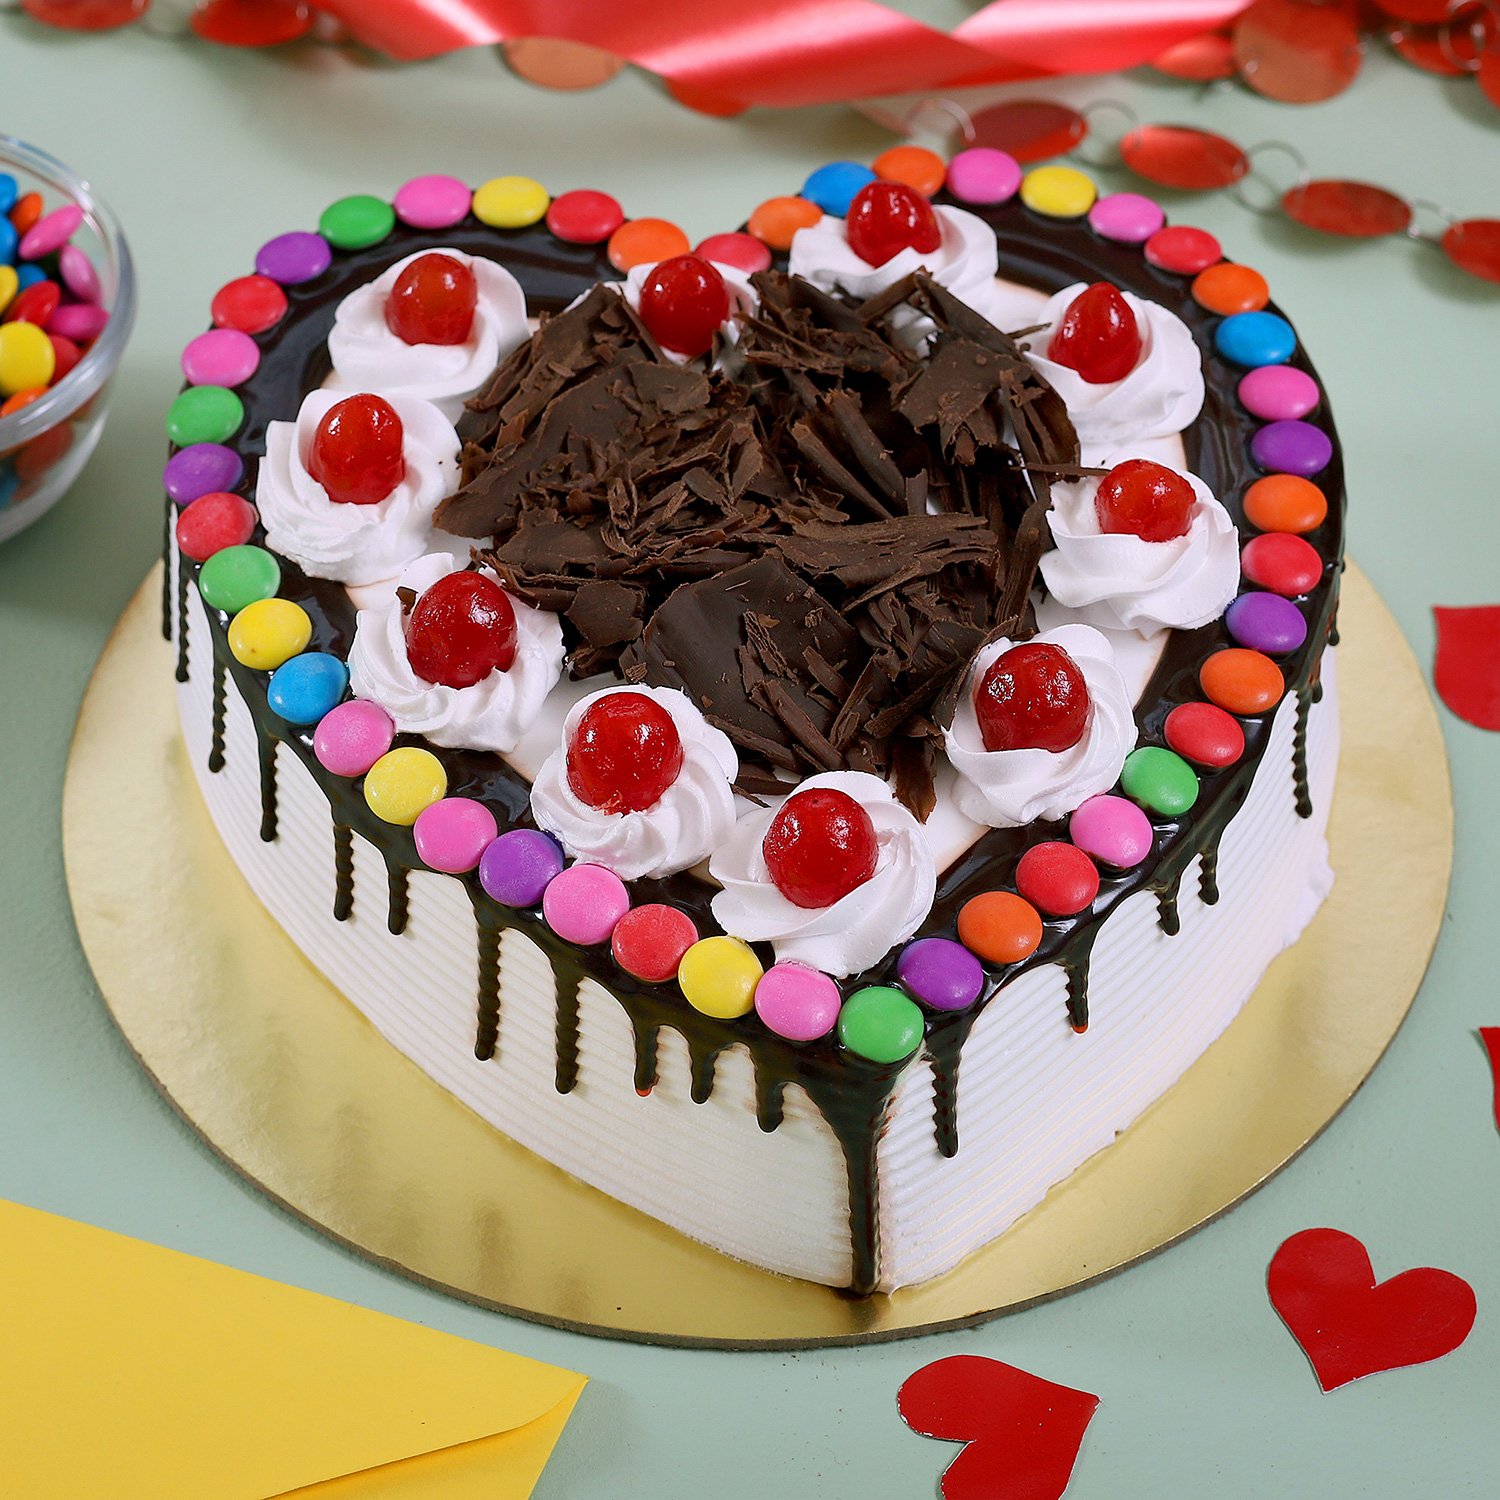 gems chocolate cake heart shape - gifts cake flower gifts delivery